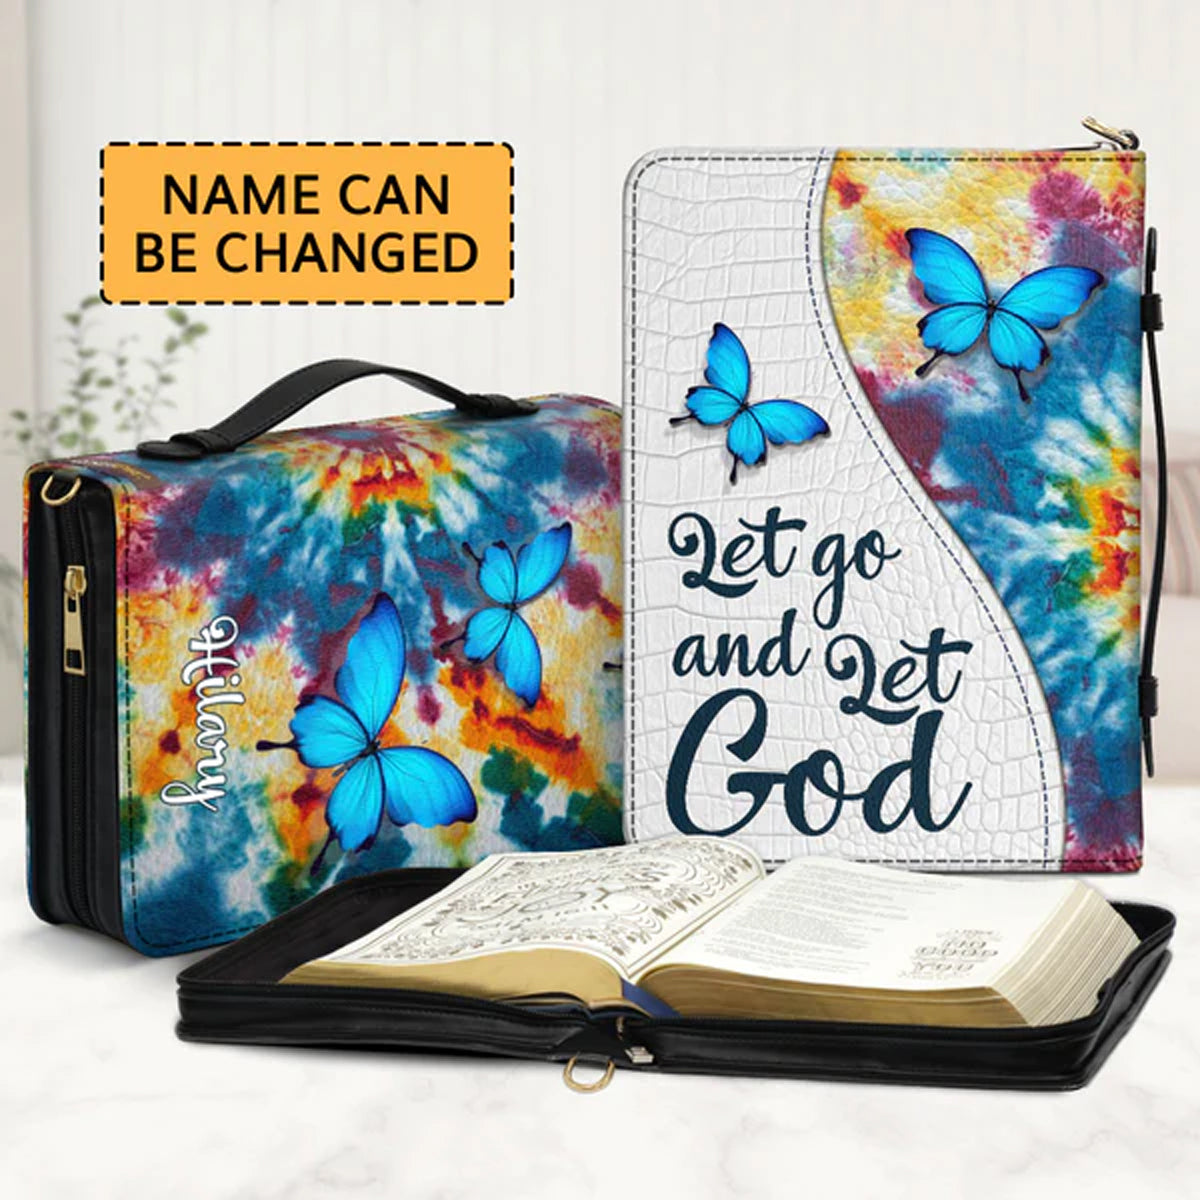 Christianartbag Bible Cover, Let Go And Let GOD, Personalized Bible Cover, Gifts For Women, Gifts For Men, Christmas Gift, CABBBCV02010823. - Christian Art Bag